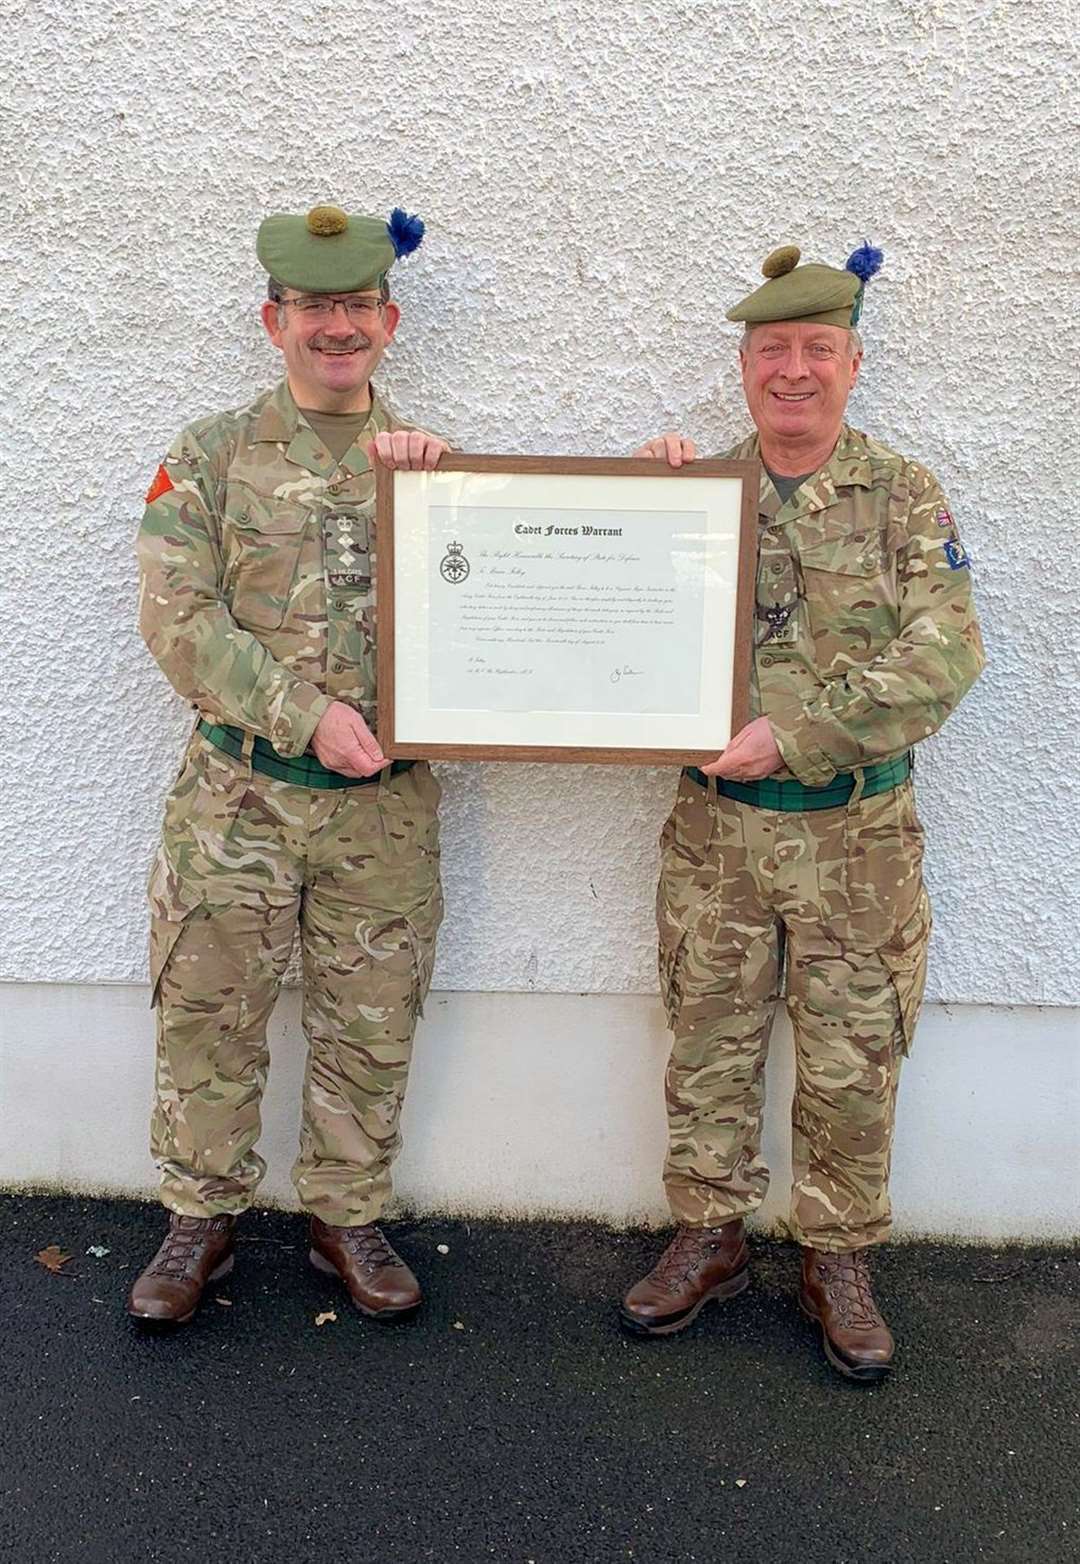 SMI Folley (right) receiving the Cadet Force Warrant from the Battalion's Commandant Col MacDonald.